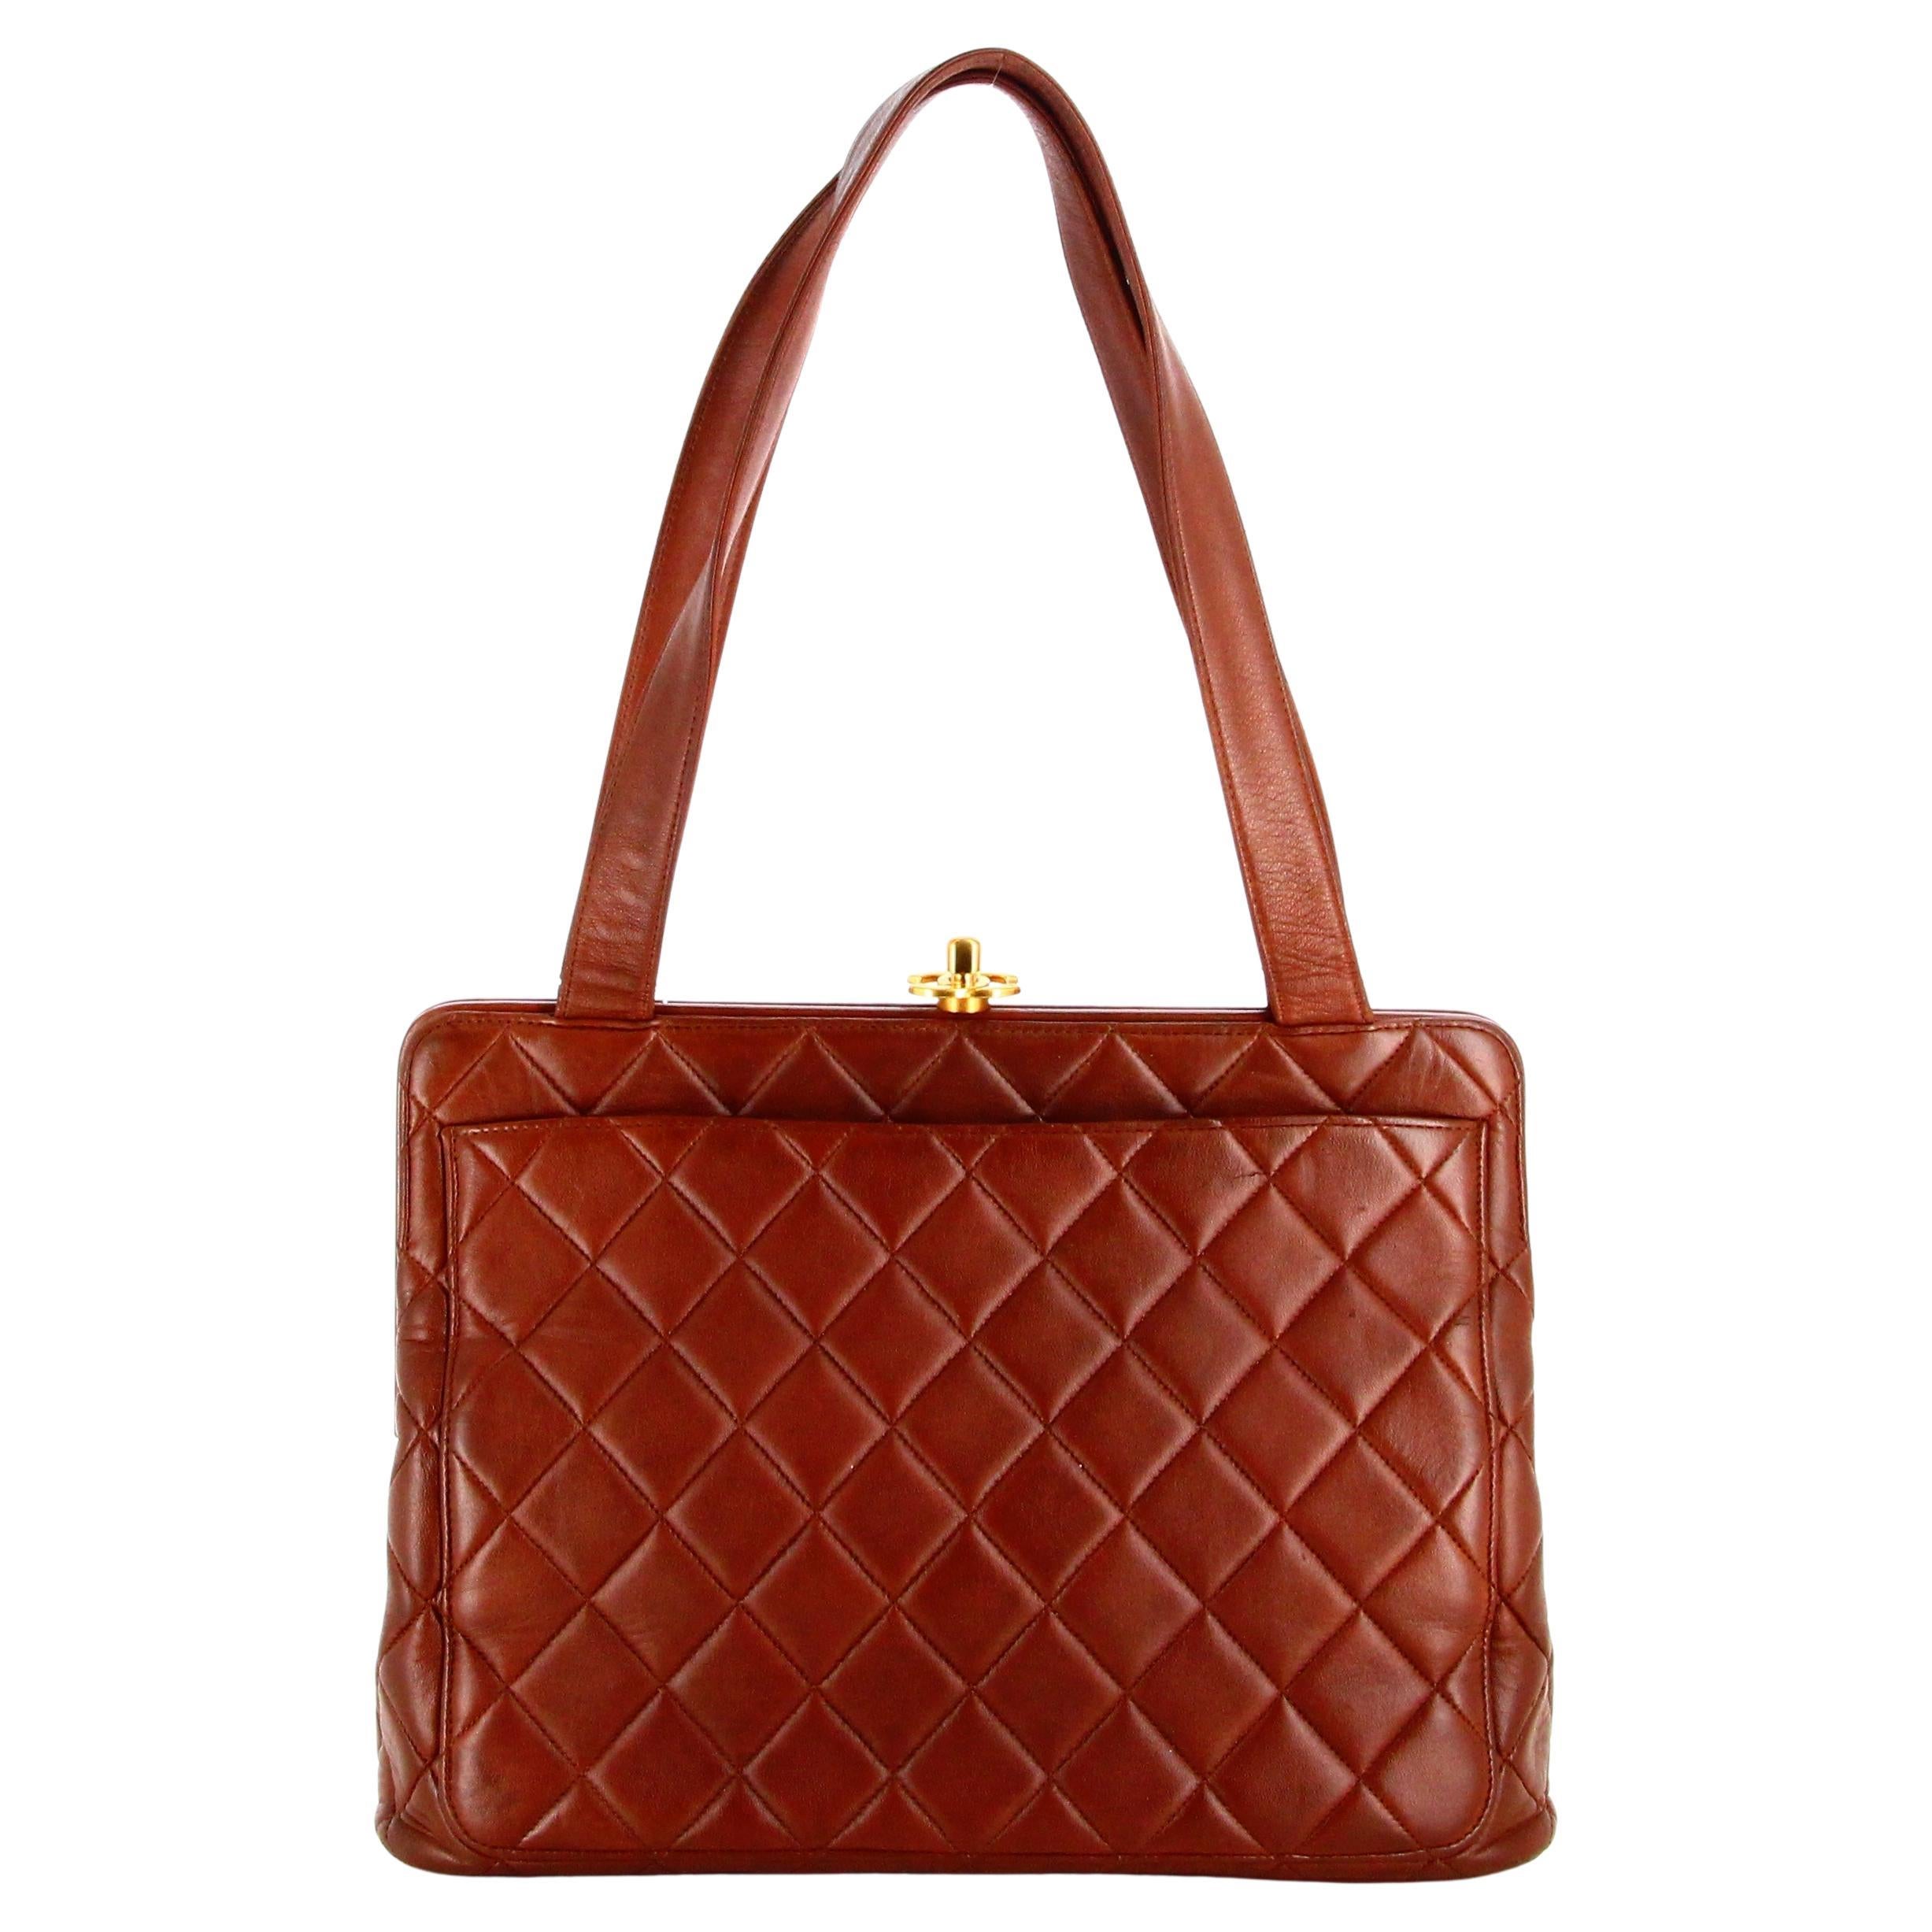 1996 Chanel Handbag Brown Quilted leather For Sale